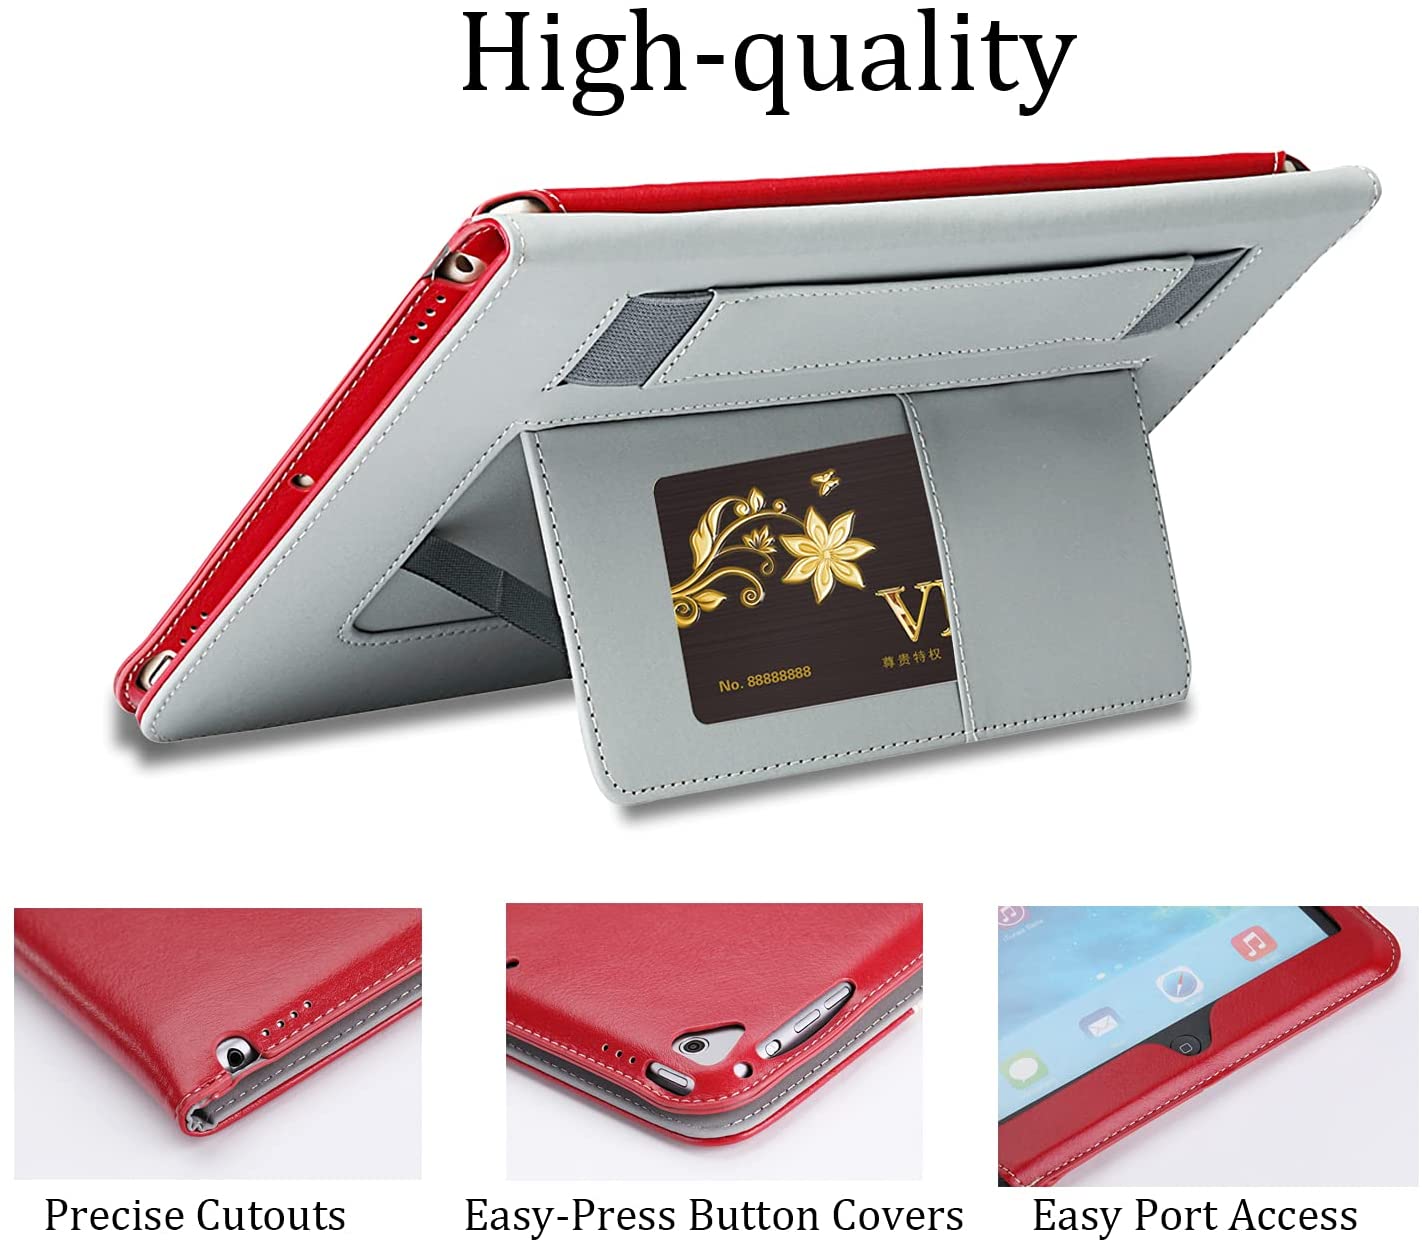 iPad 9.7 inch Magnetic Closure PU Leather Cover Case for iPad 2/3/4